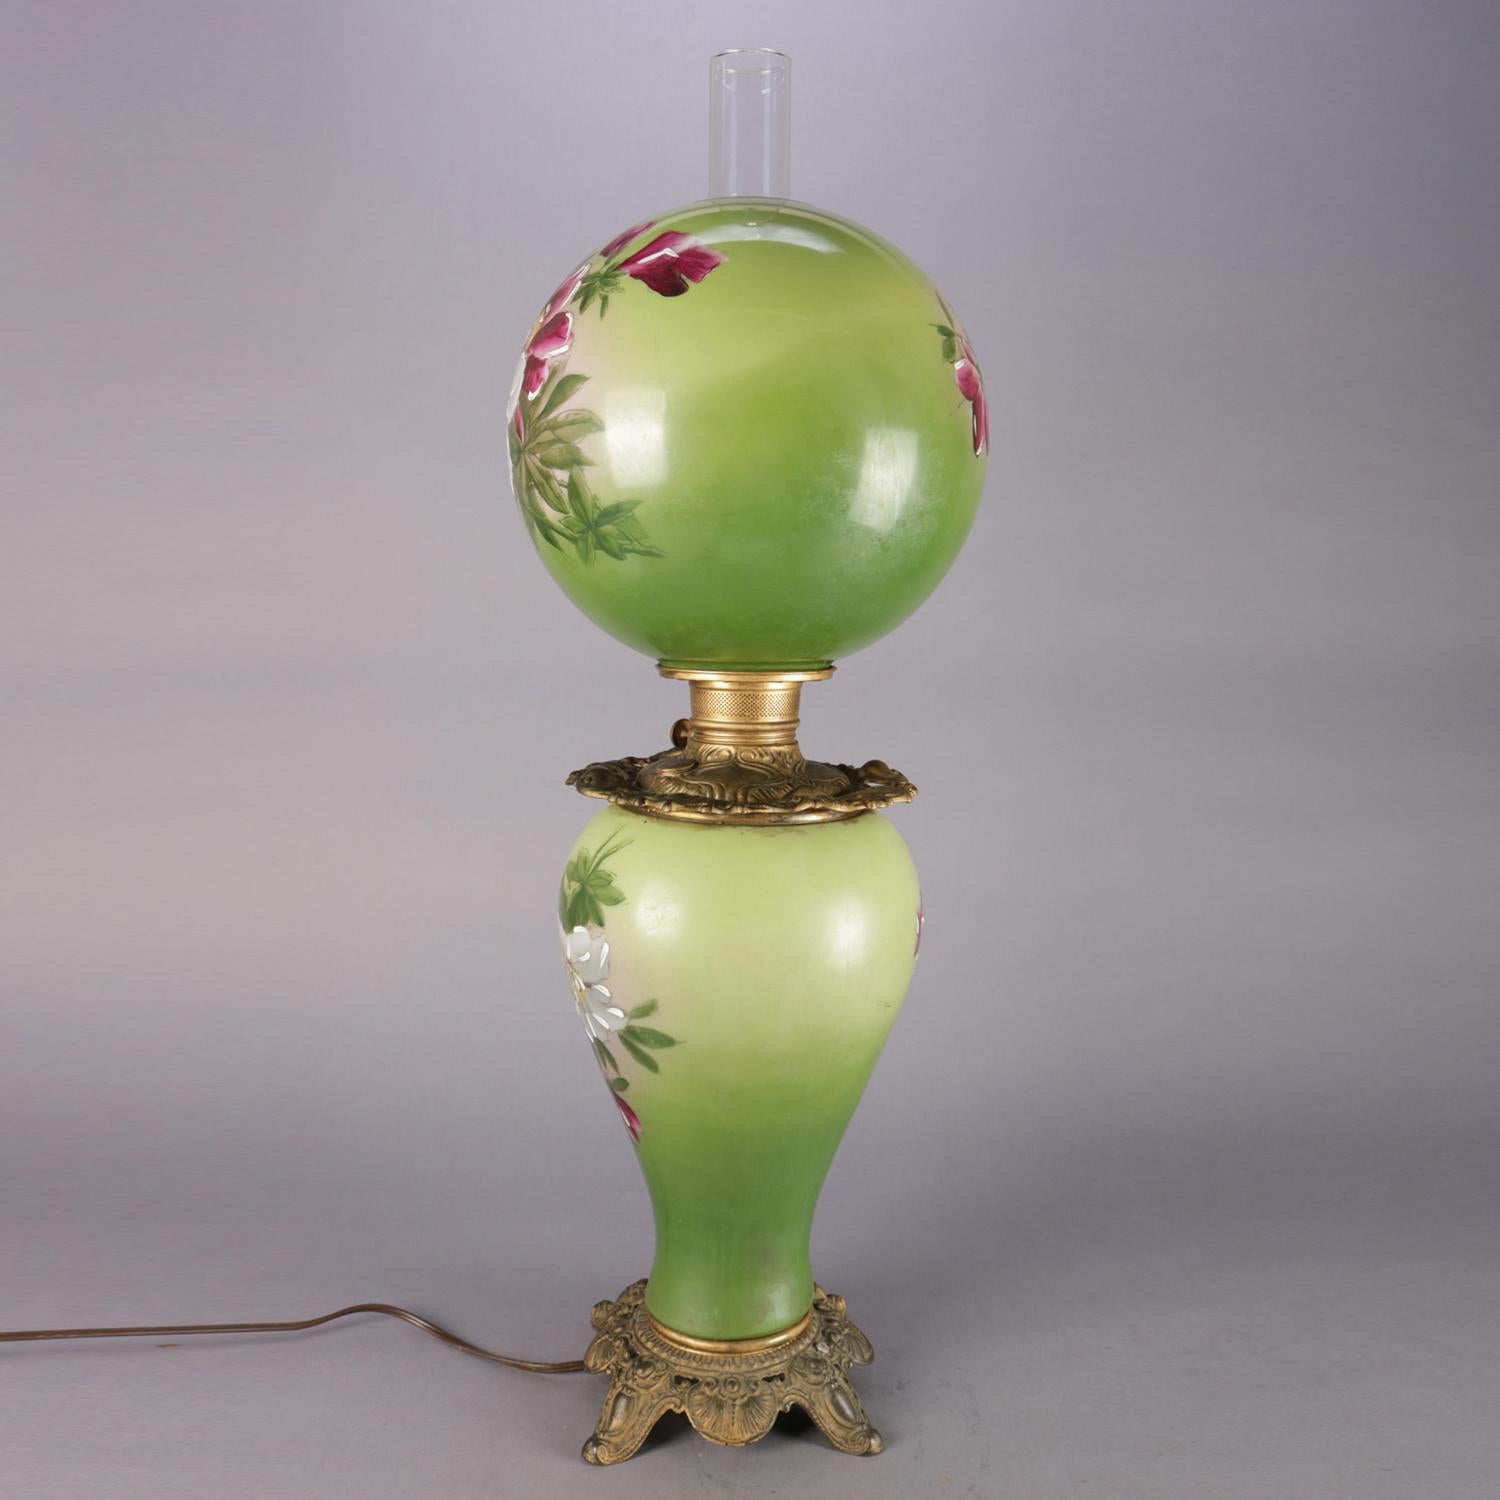 Antique electrified gone-with-the-wind parlor lamp features hand-painted lily on graduated green ground and is seated on pierced scroll and foliated footed base, 